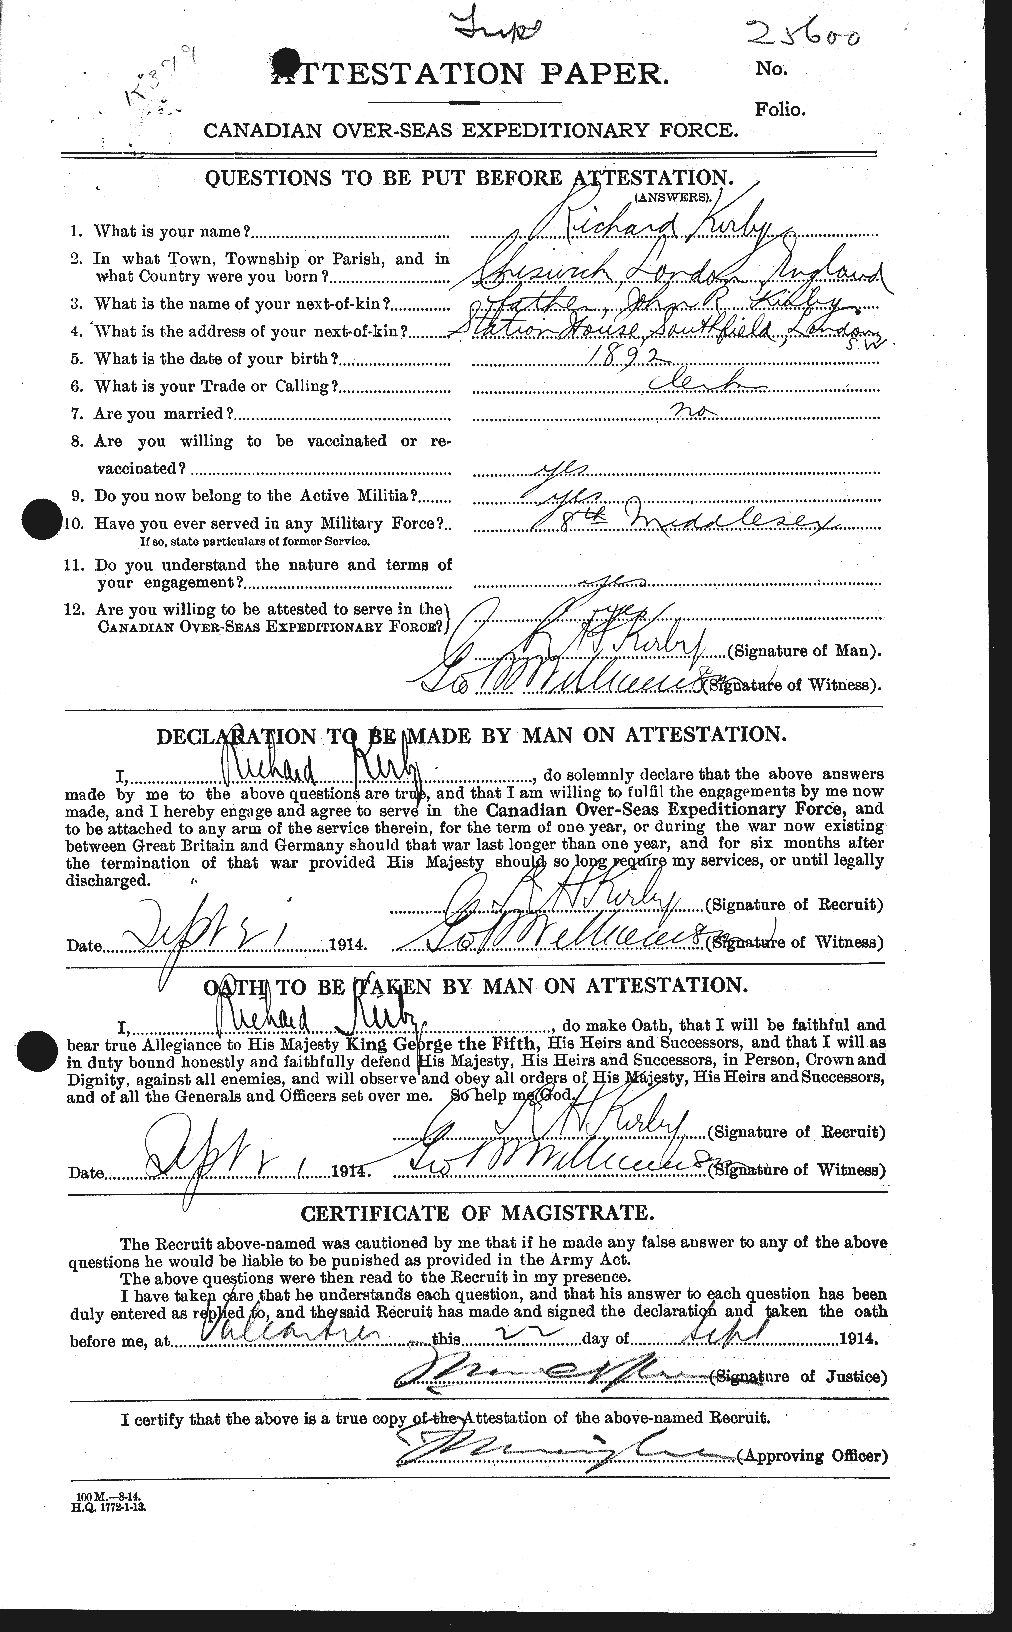 Personnel Records of the First World War - CEF 437265a